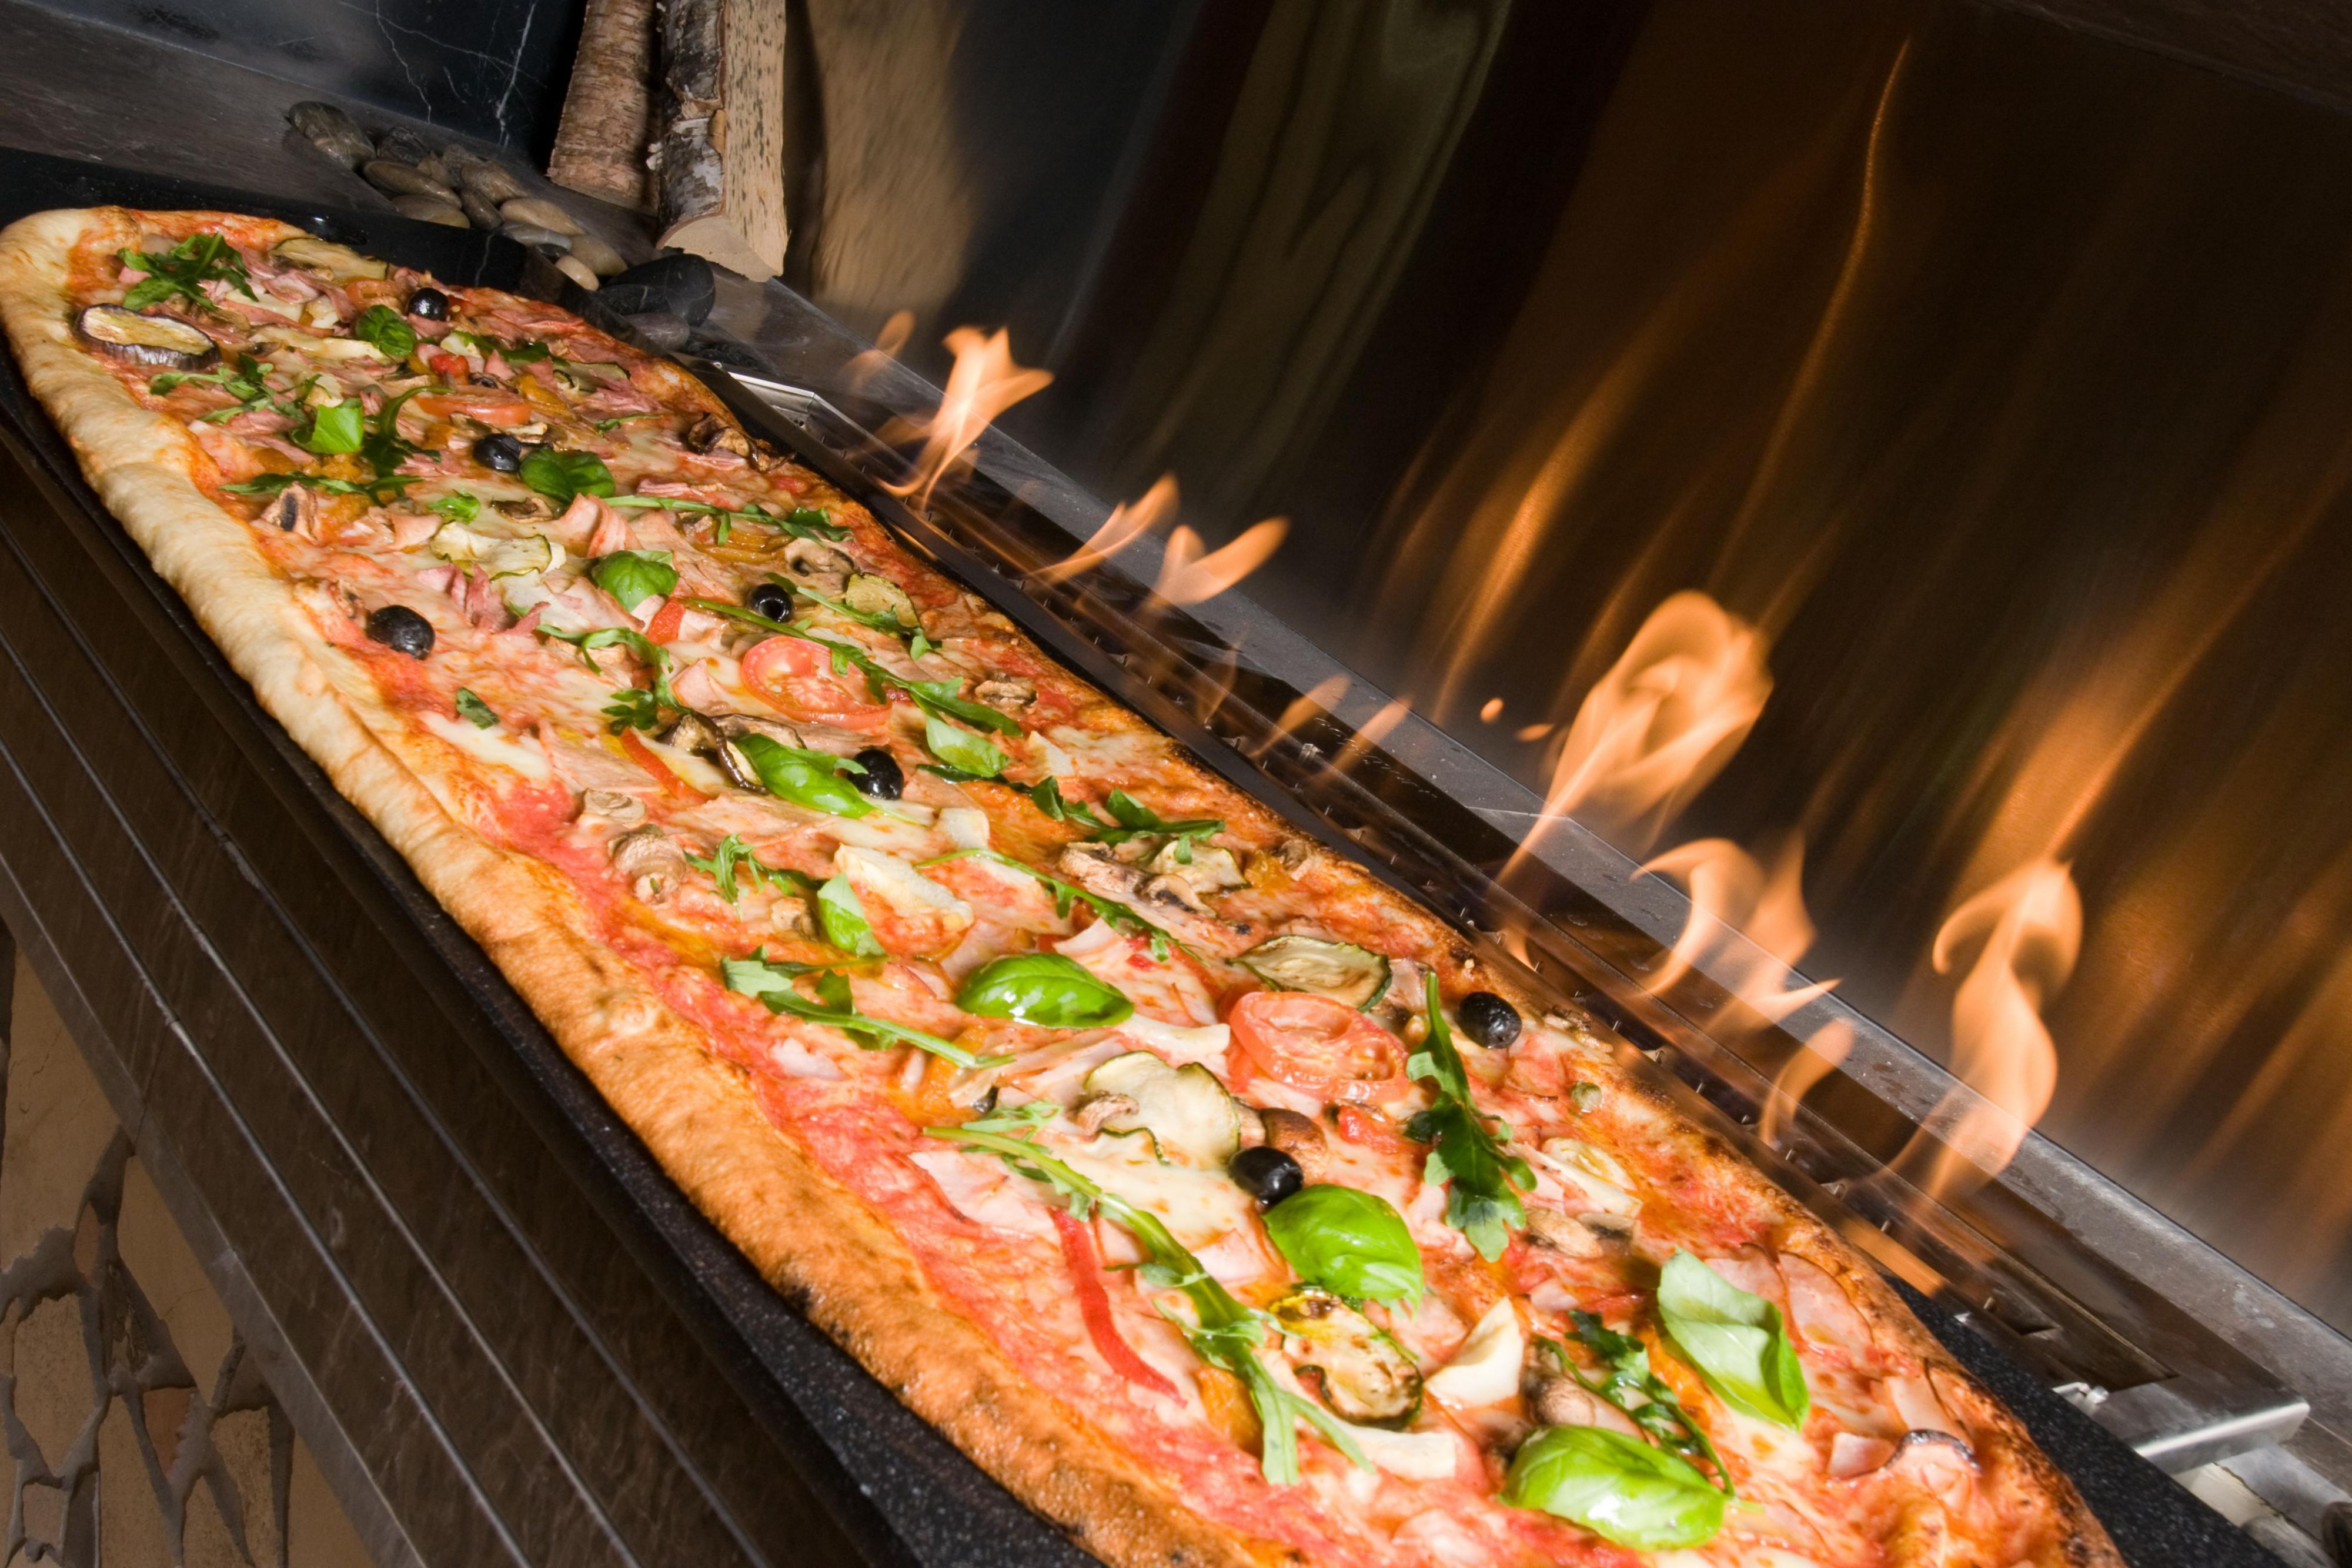 Spaccanapoli&#39;s signature dish: One-meter long Pizza!